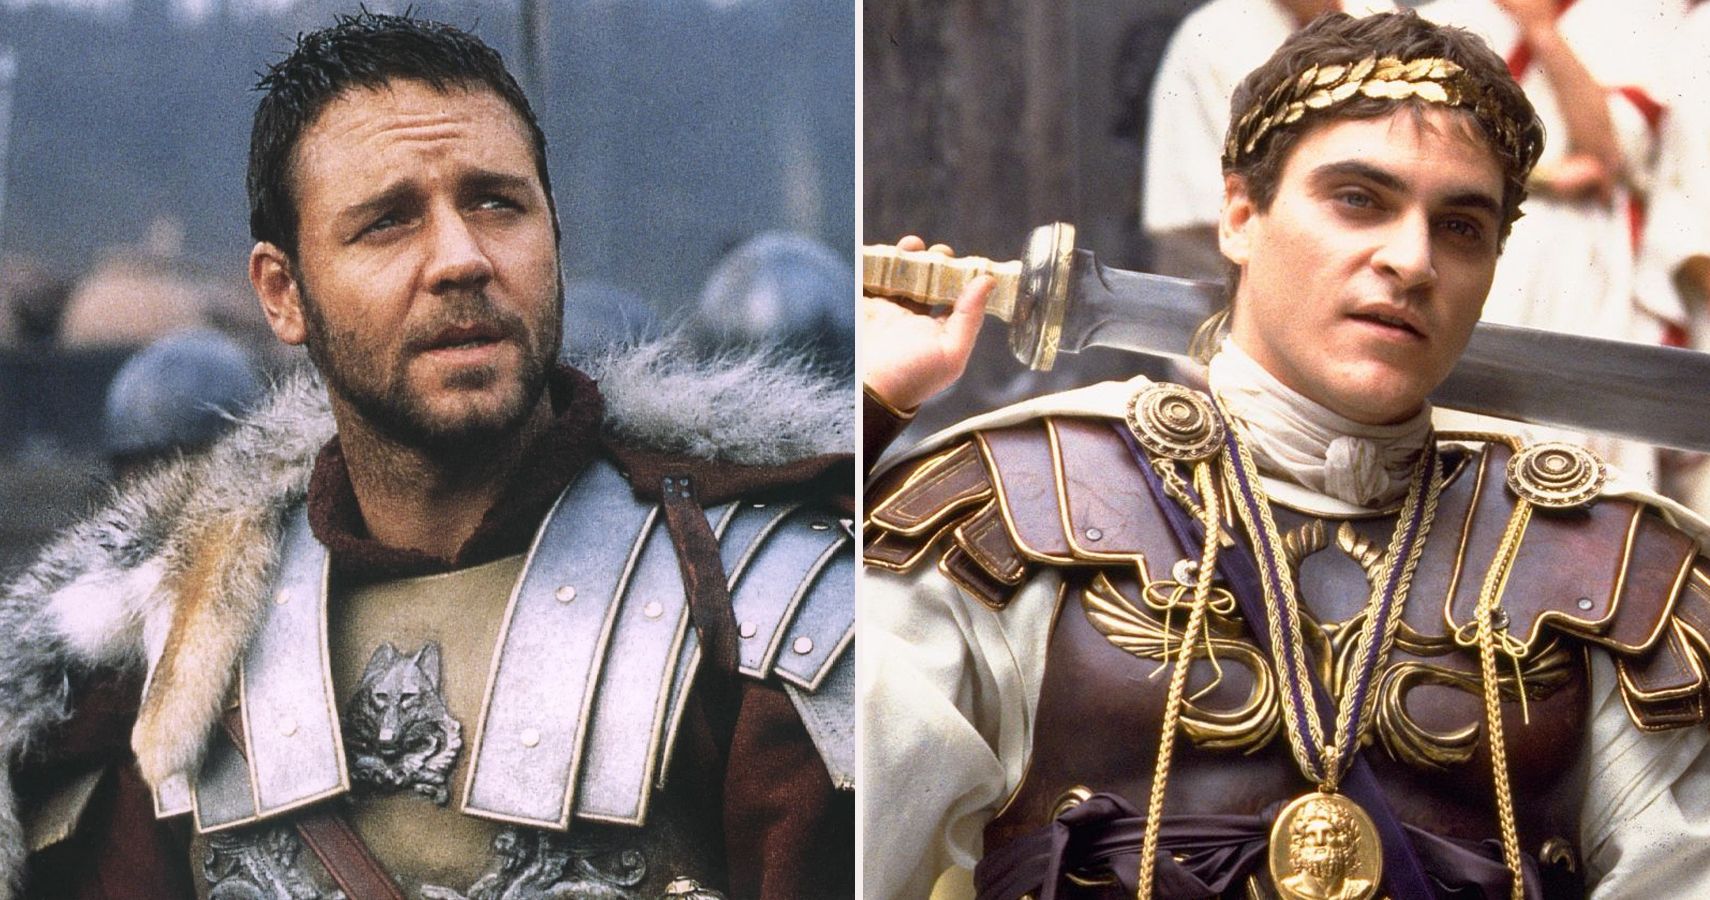 Are You Not Entertained?! 15 Most Iconic Quotes From Gladiator